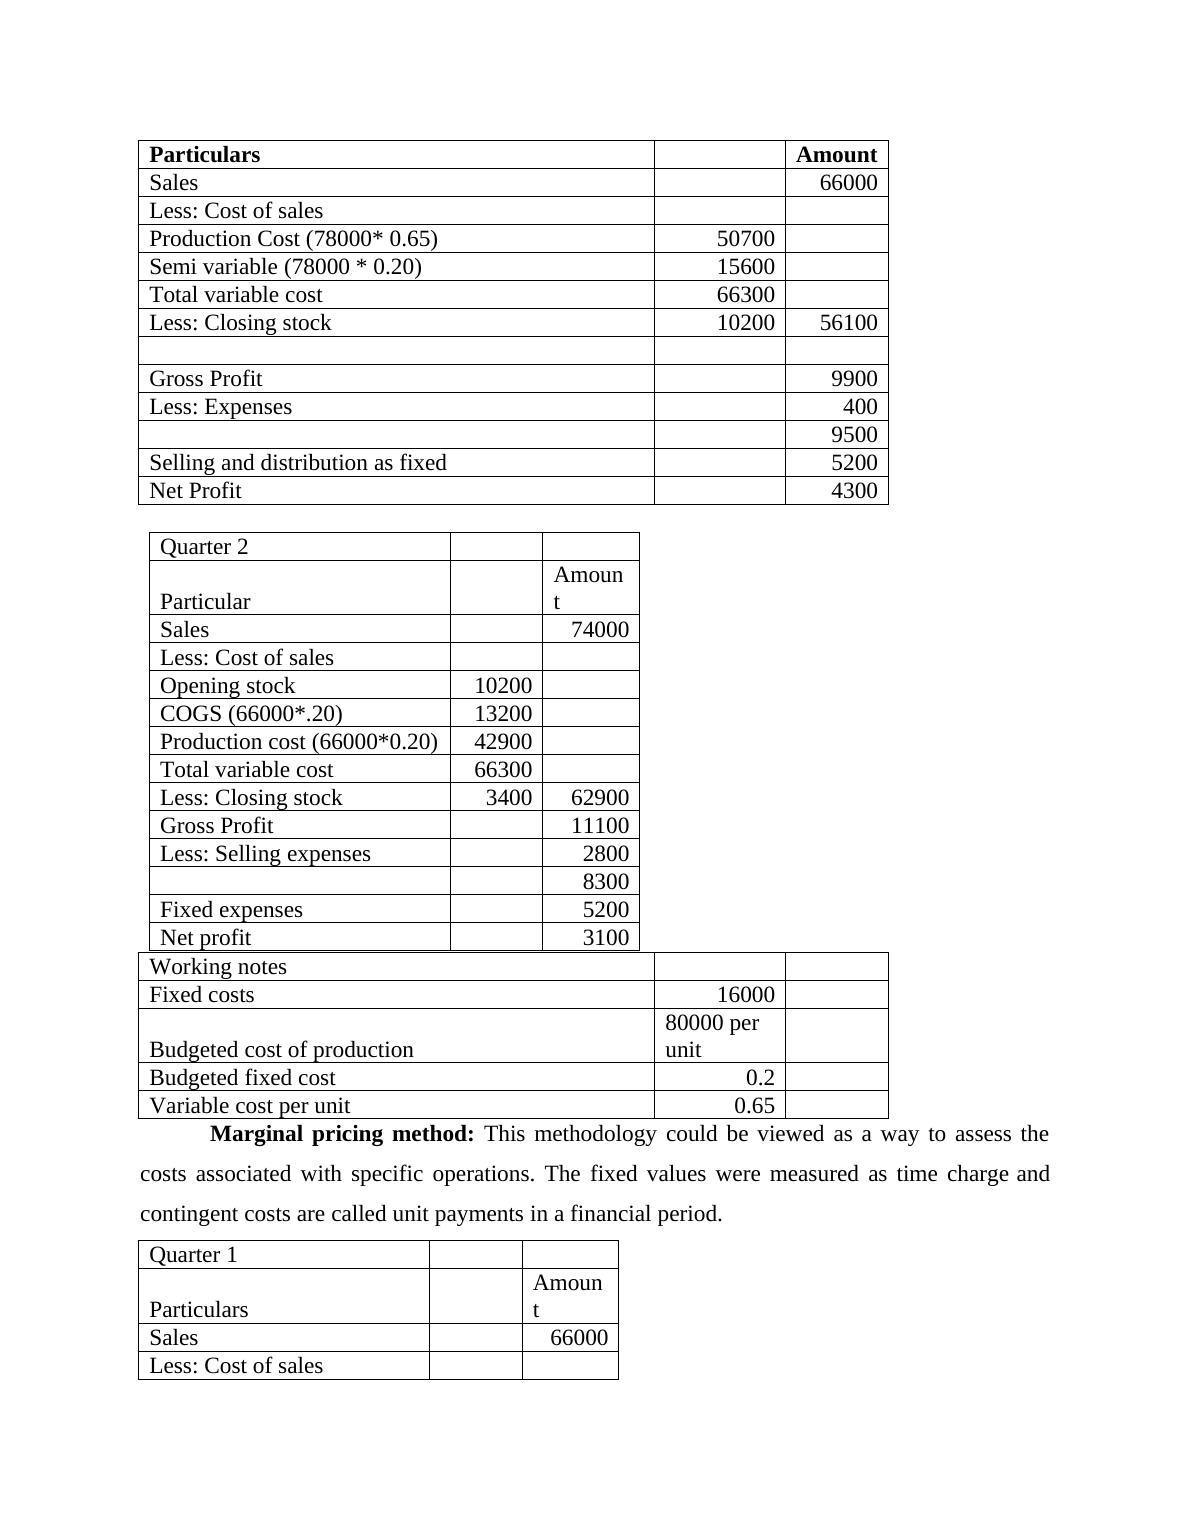 Cost Assessment and Review of Financial Statements_4